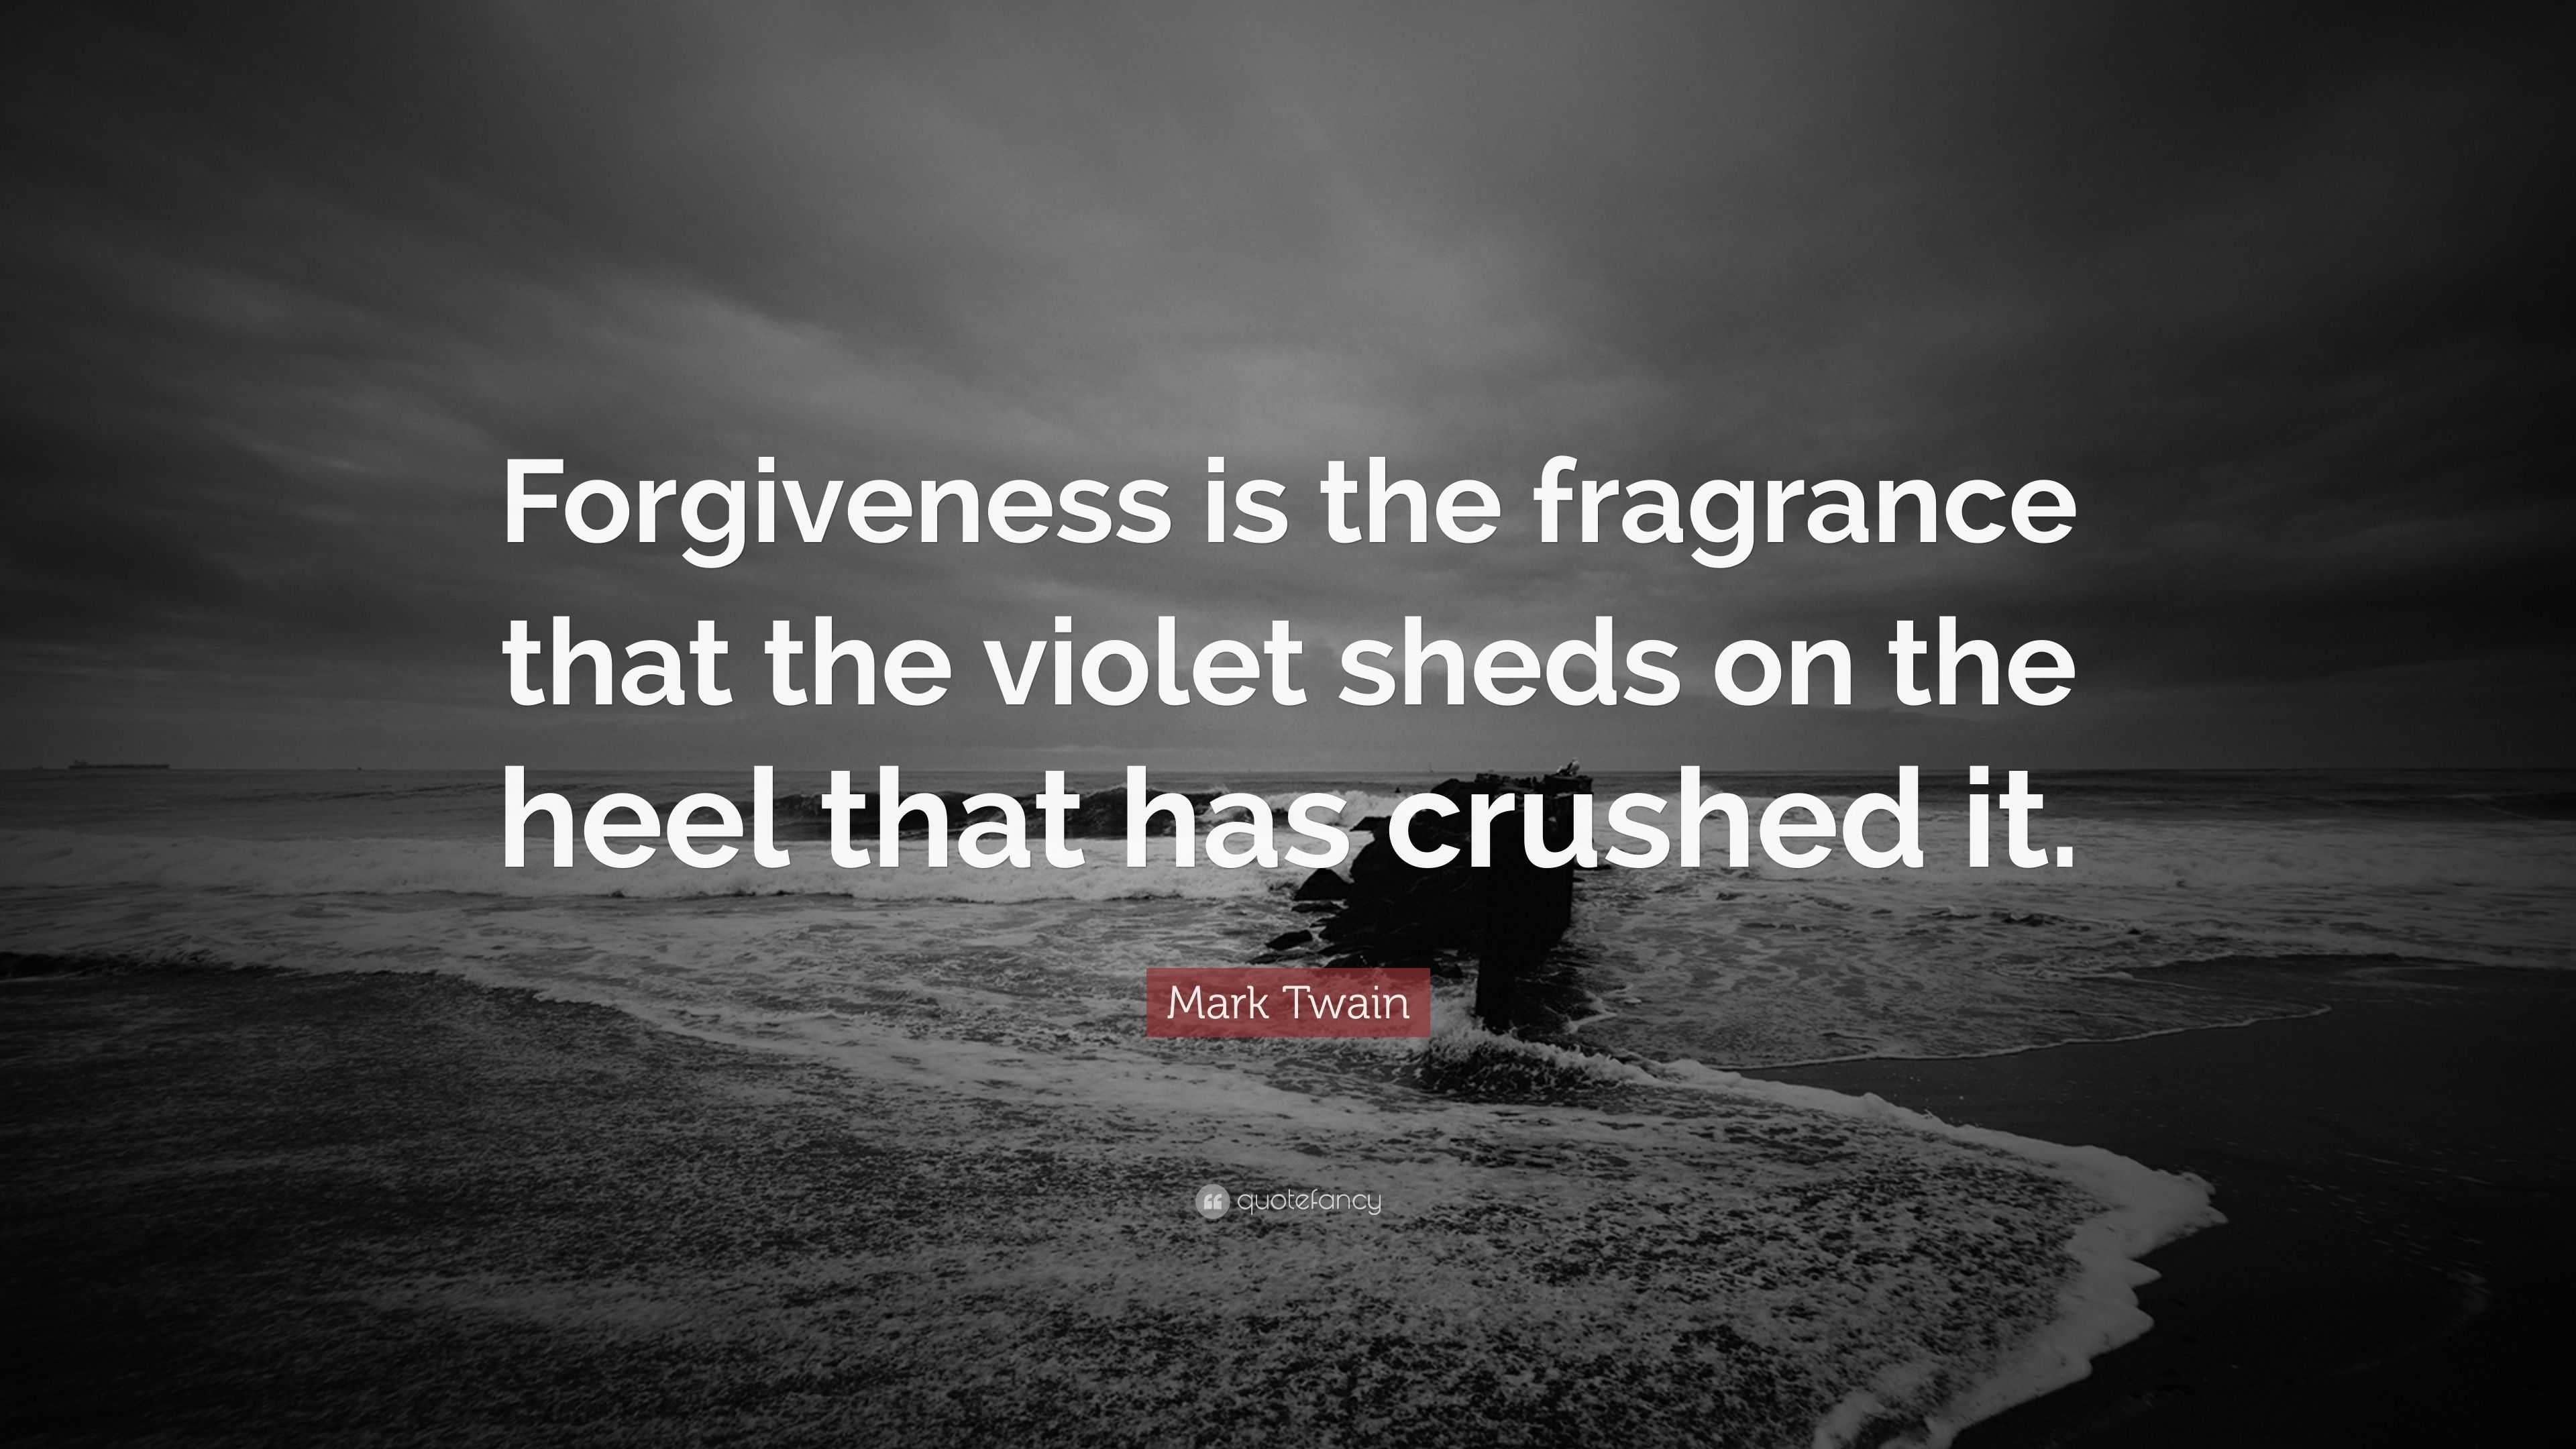 Mark Twain Quote: "Forgiveness is the fragrance that the ...